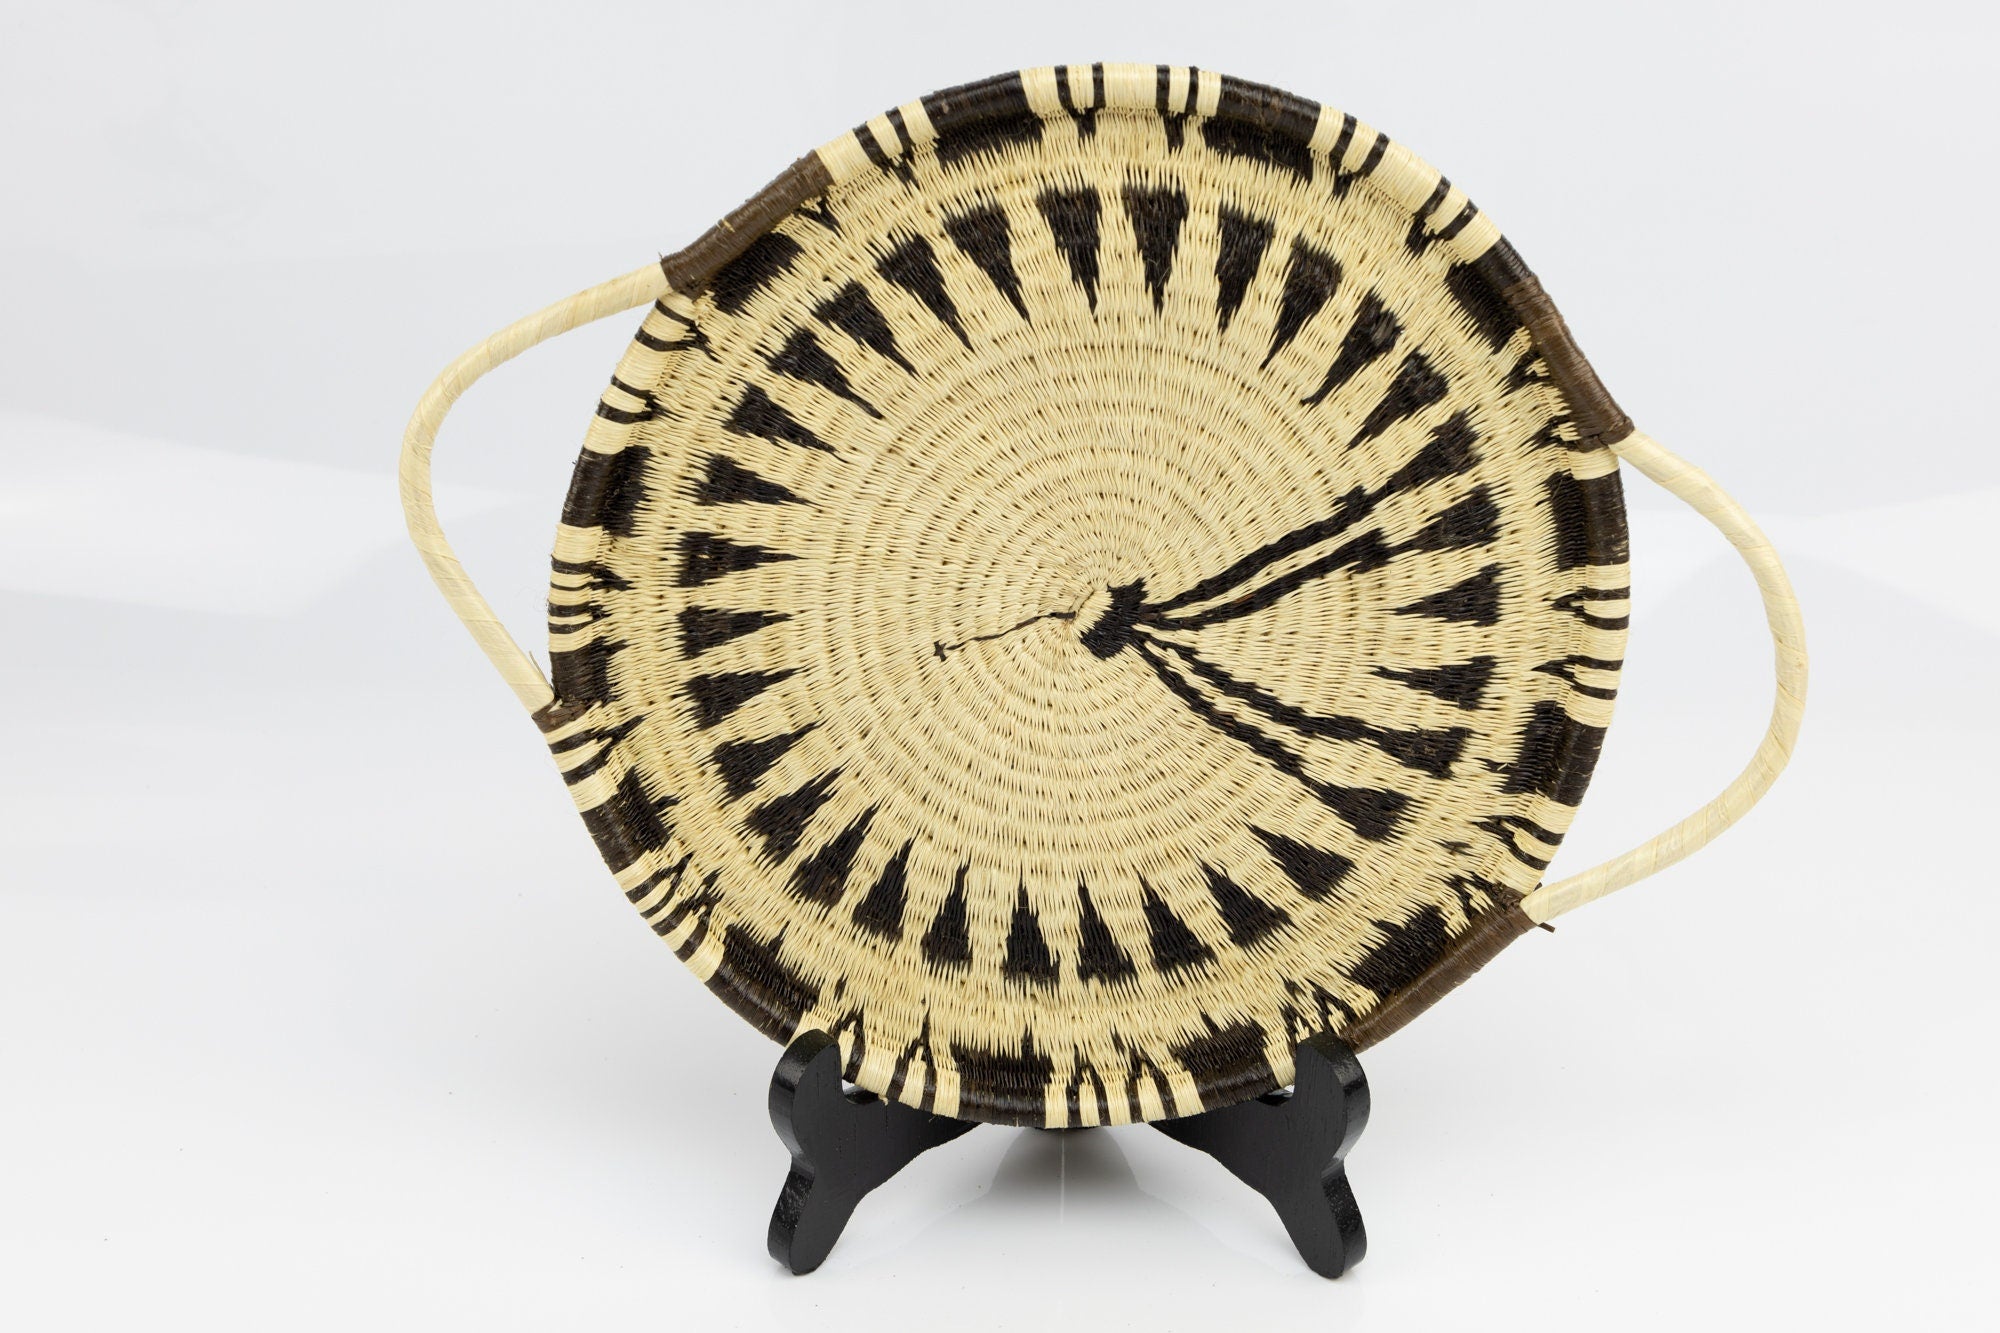 Hand Woven Black And White Plate Basket Made By Wounaan And Emberá Panama Indians. Wall Basket, Woven Basket, Home Decor, Latin Art